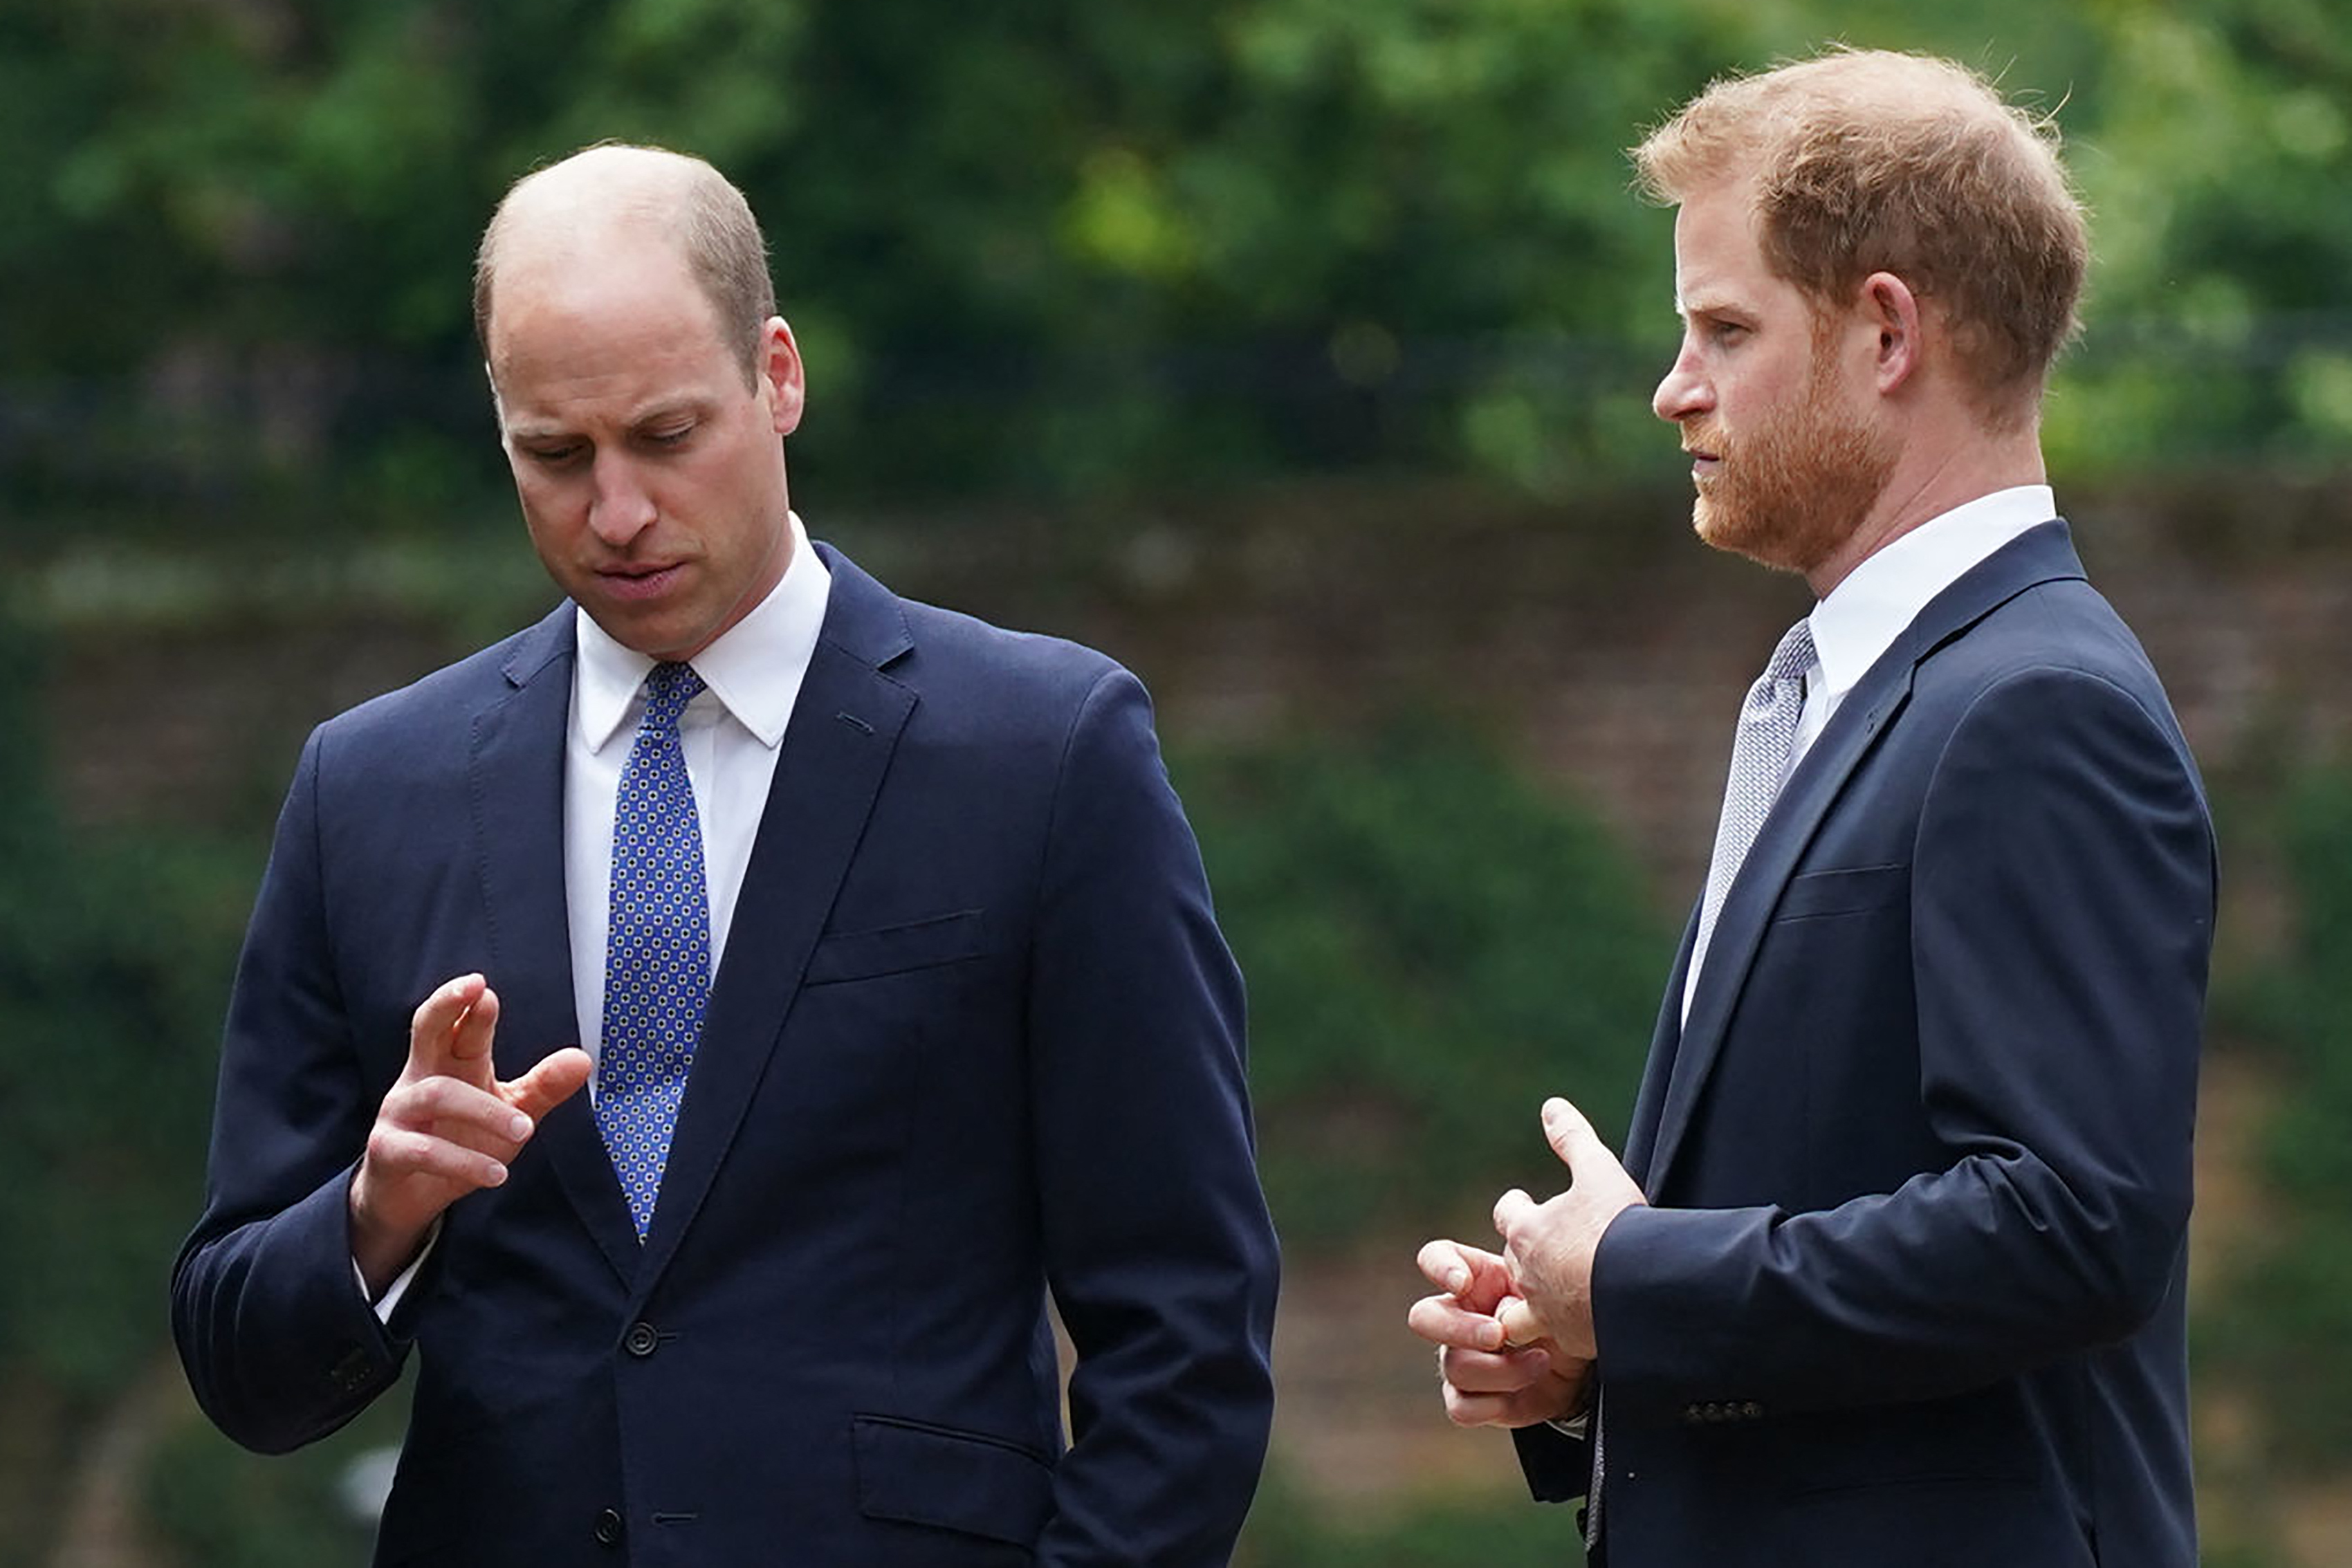 Prince William and Prince Harry standing in the Sunken Garden together ahead of the unveiling of Princess Diana's statue